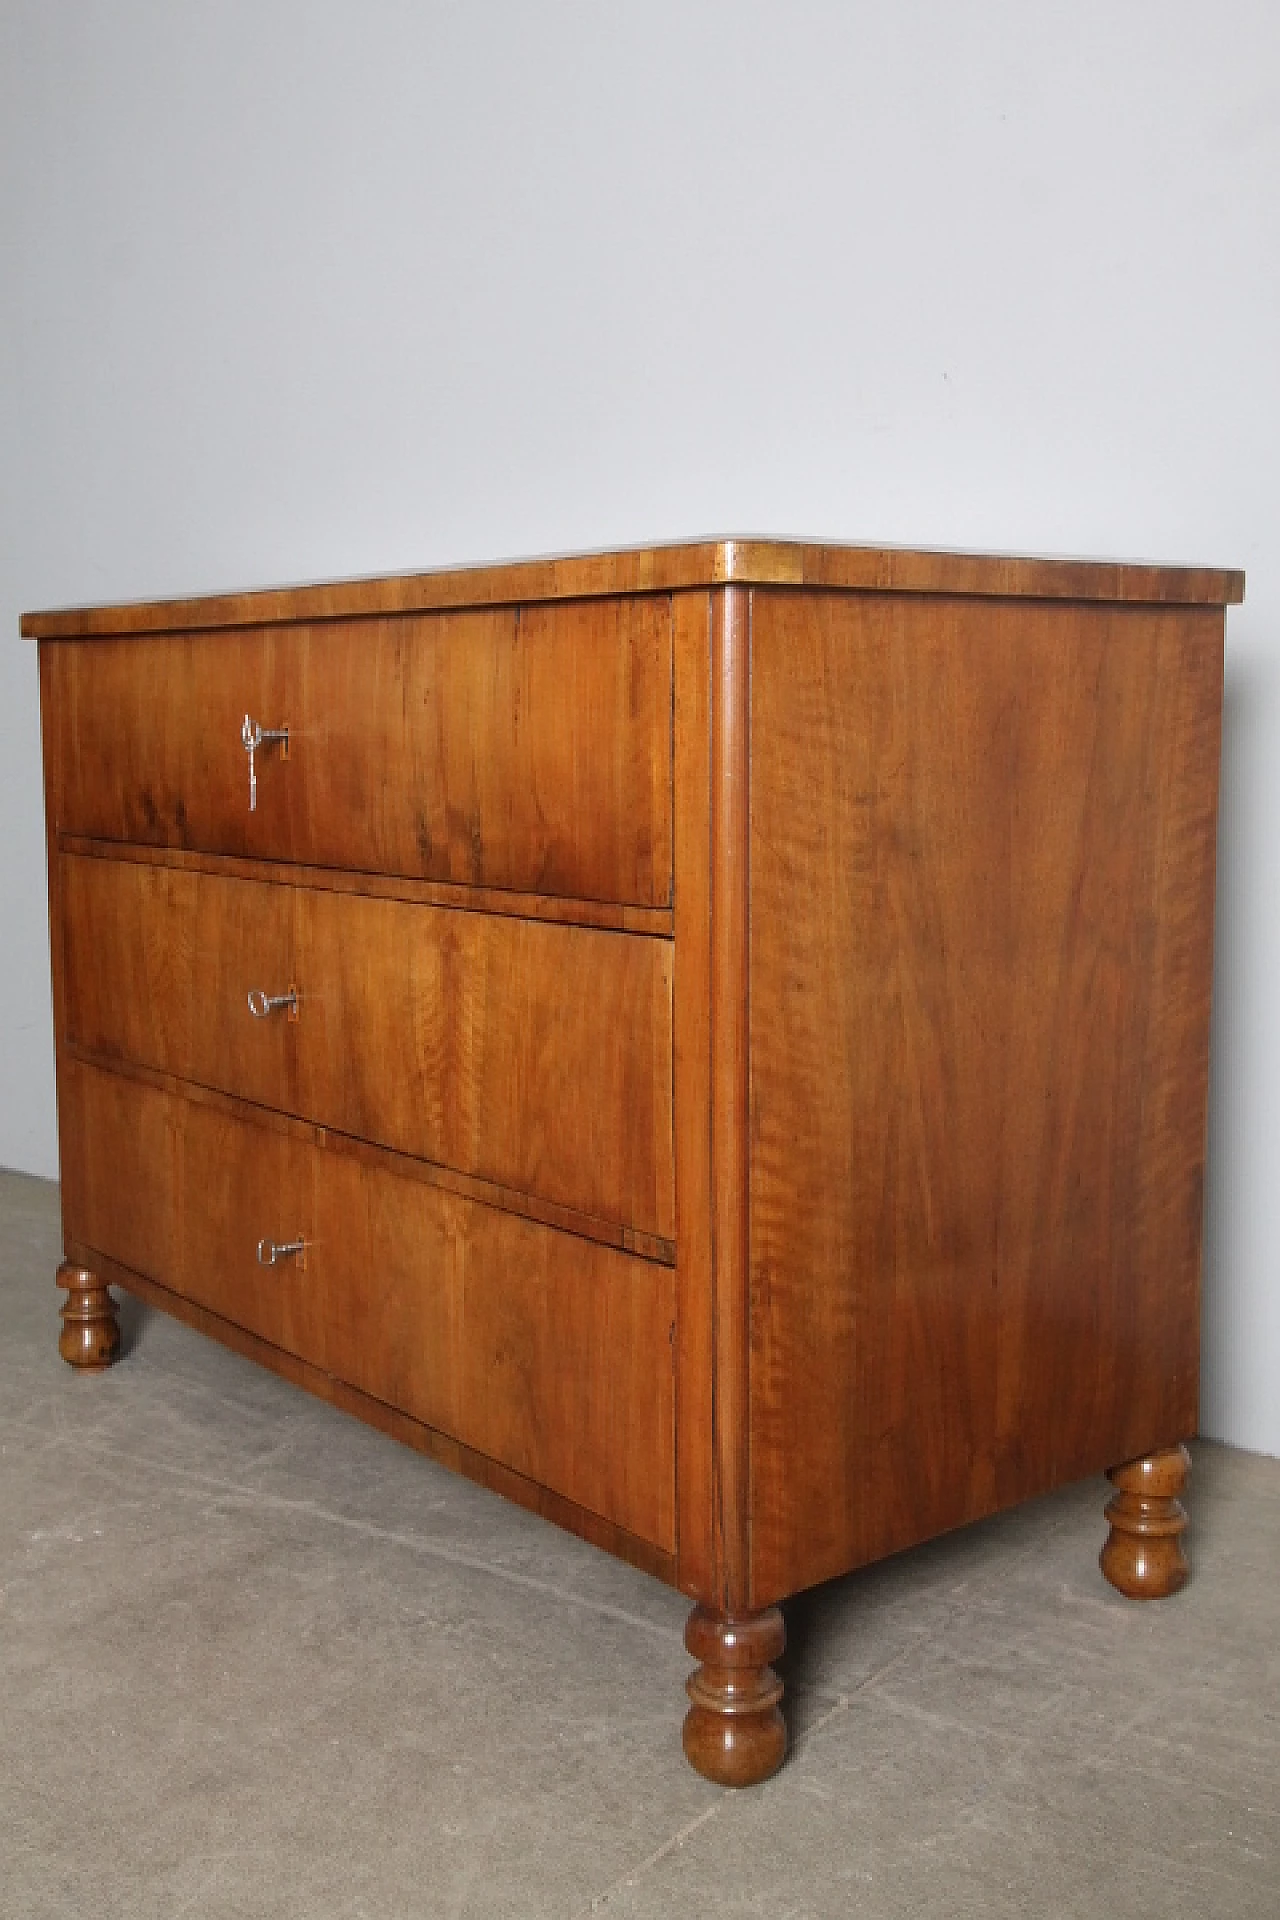 Direttorio walnut panelled dresser with three drawers, early 19th century 4